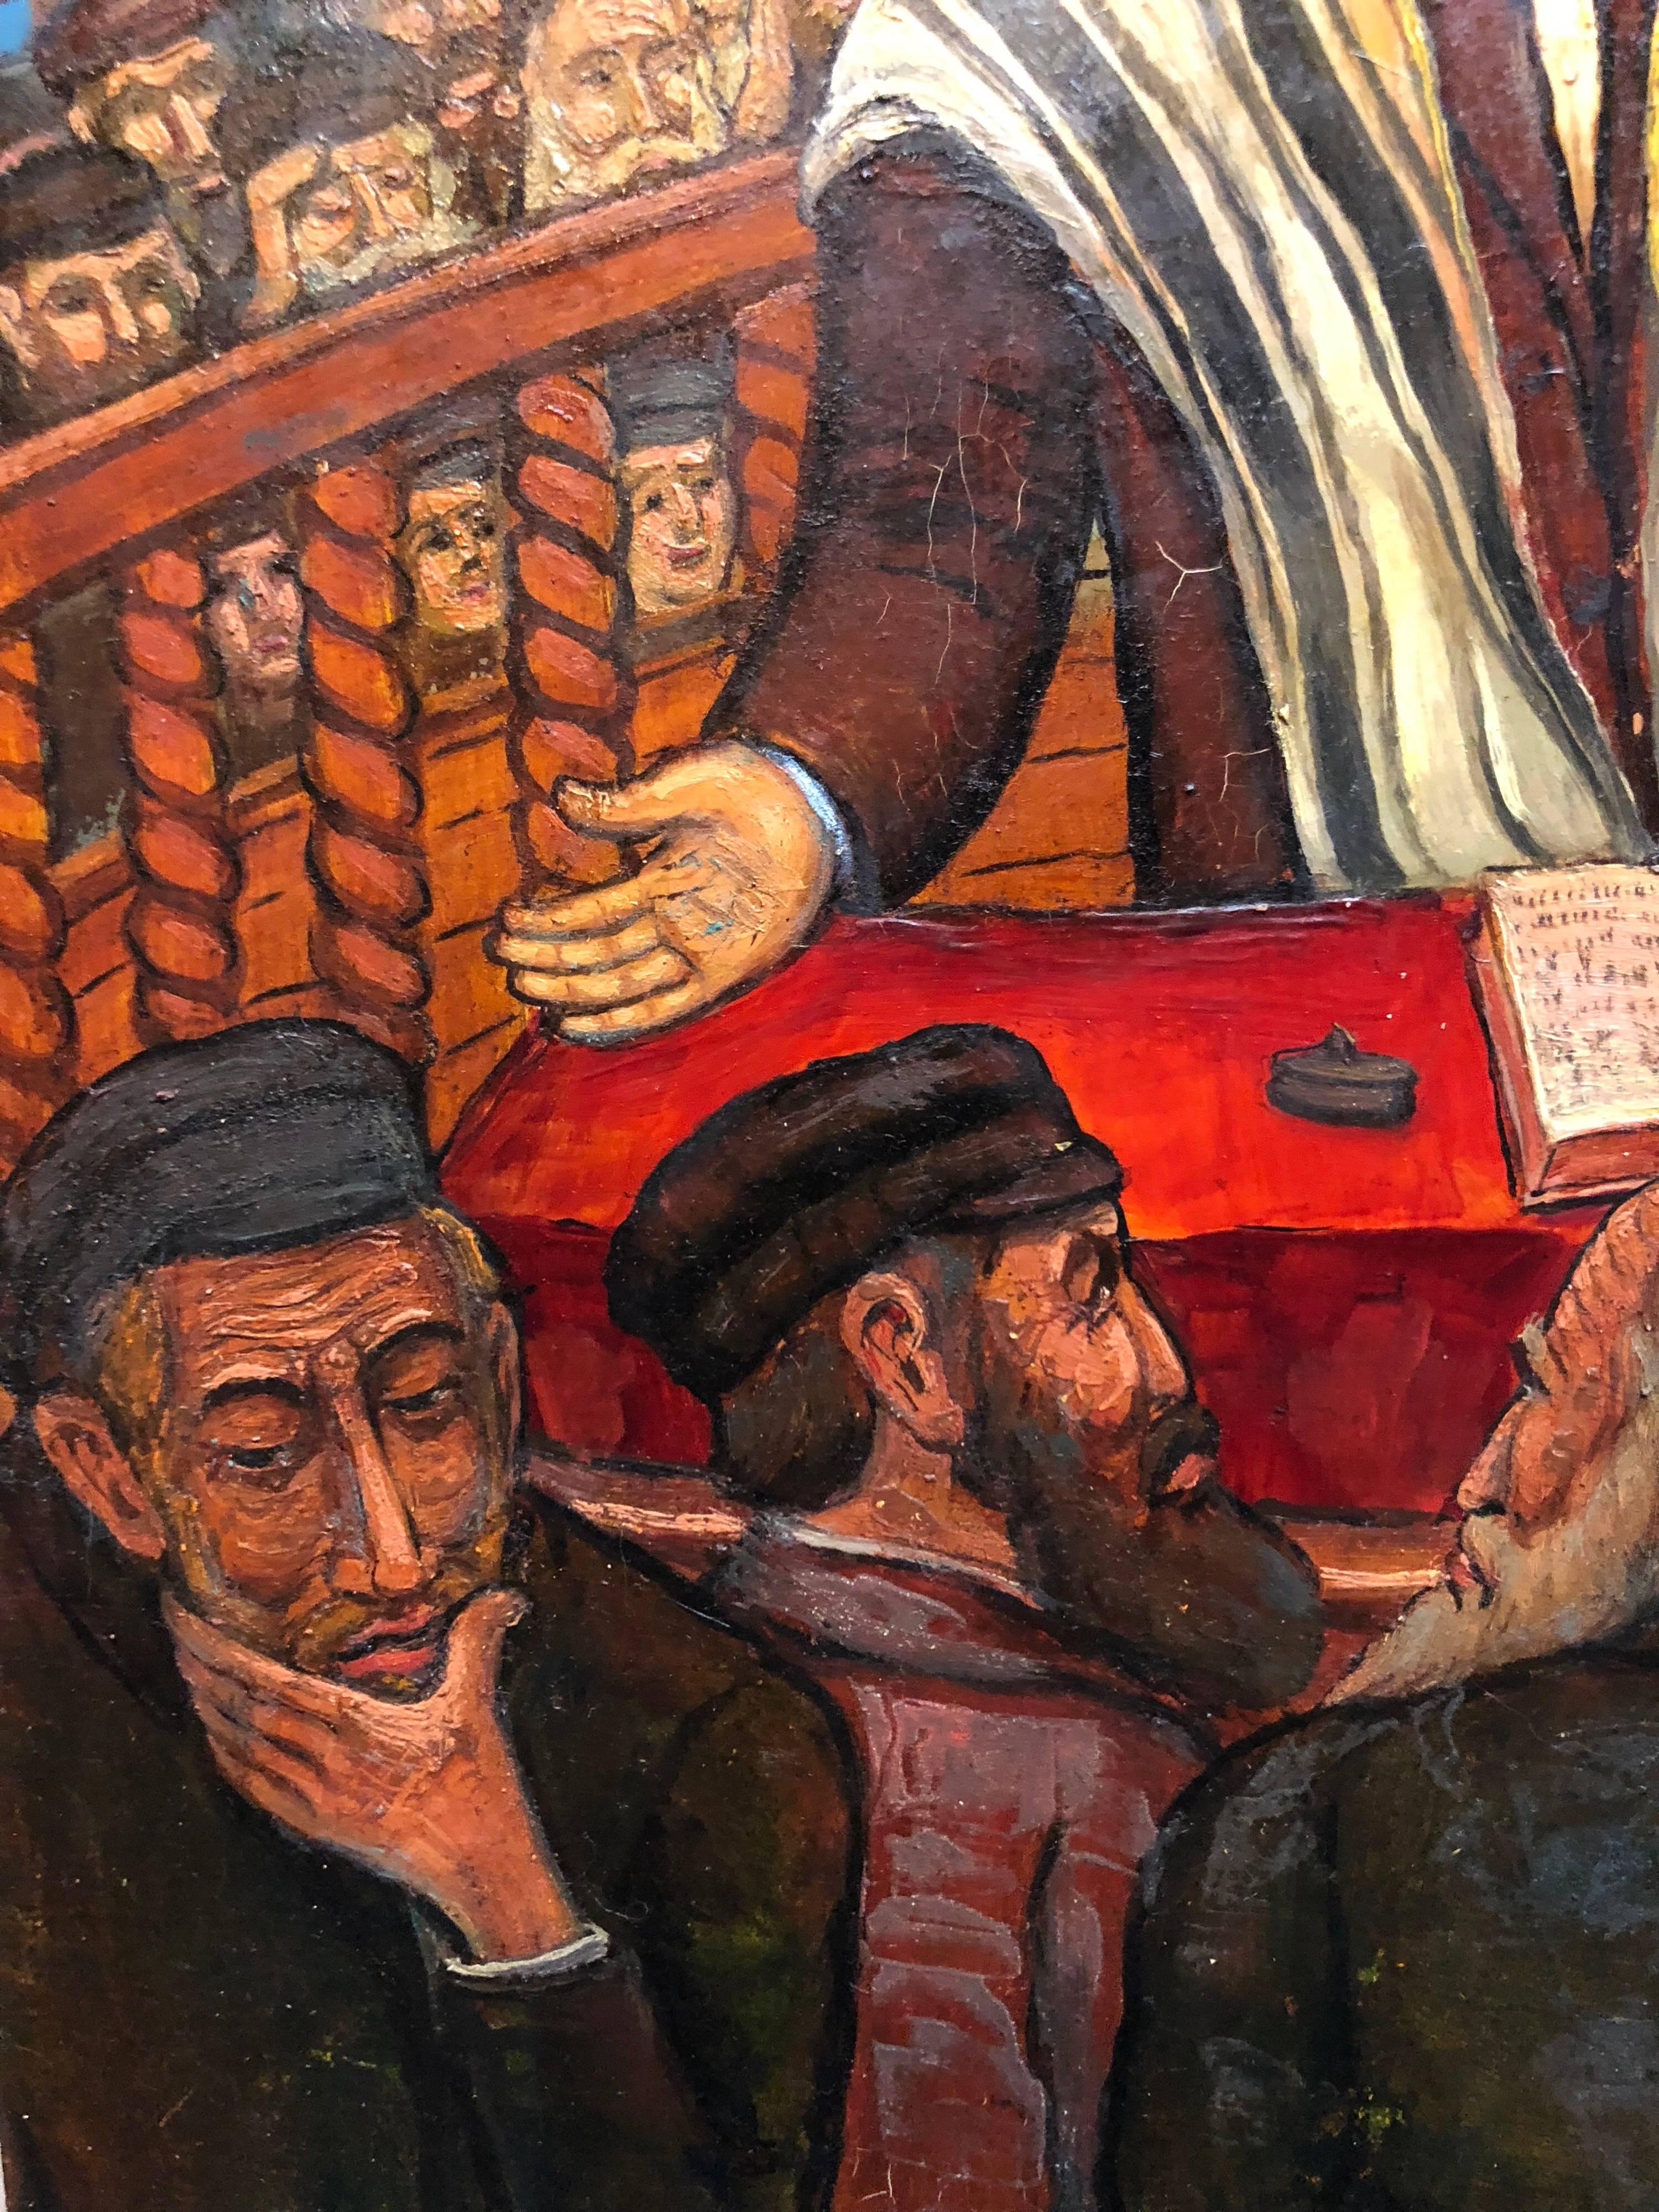 Genre: Modern
Subject: Hasidic Rabbi preaching in Synagogue
Medium: Oil
Surface: Board, size includes artist decorated frame 
Country: United States

The imagery of Maurice Kish (1895-1987), whether factories or carousels, reliably subverts